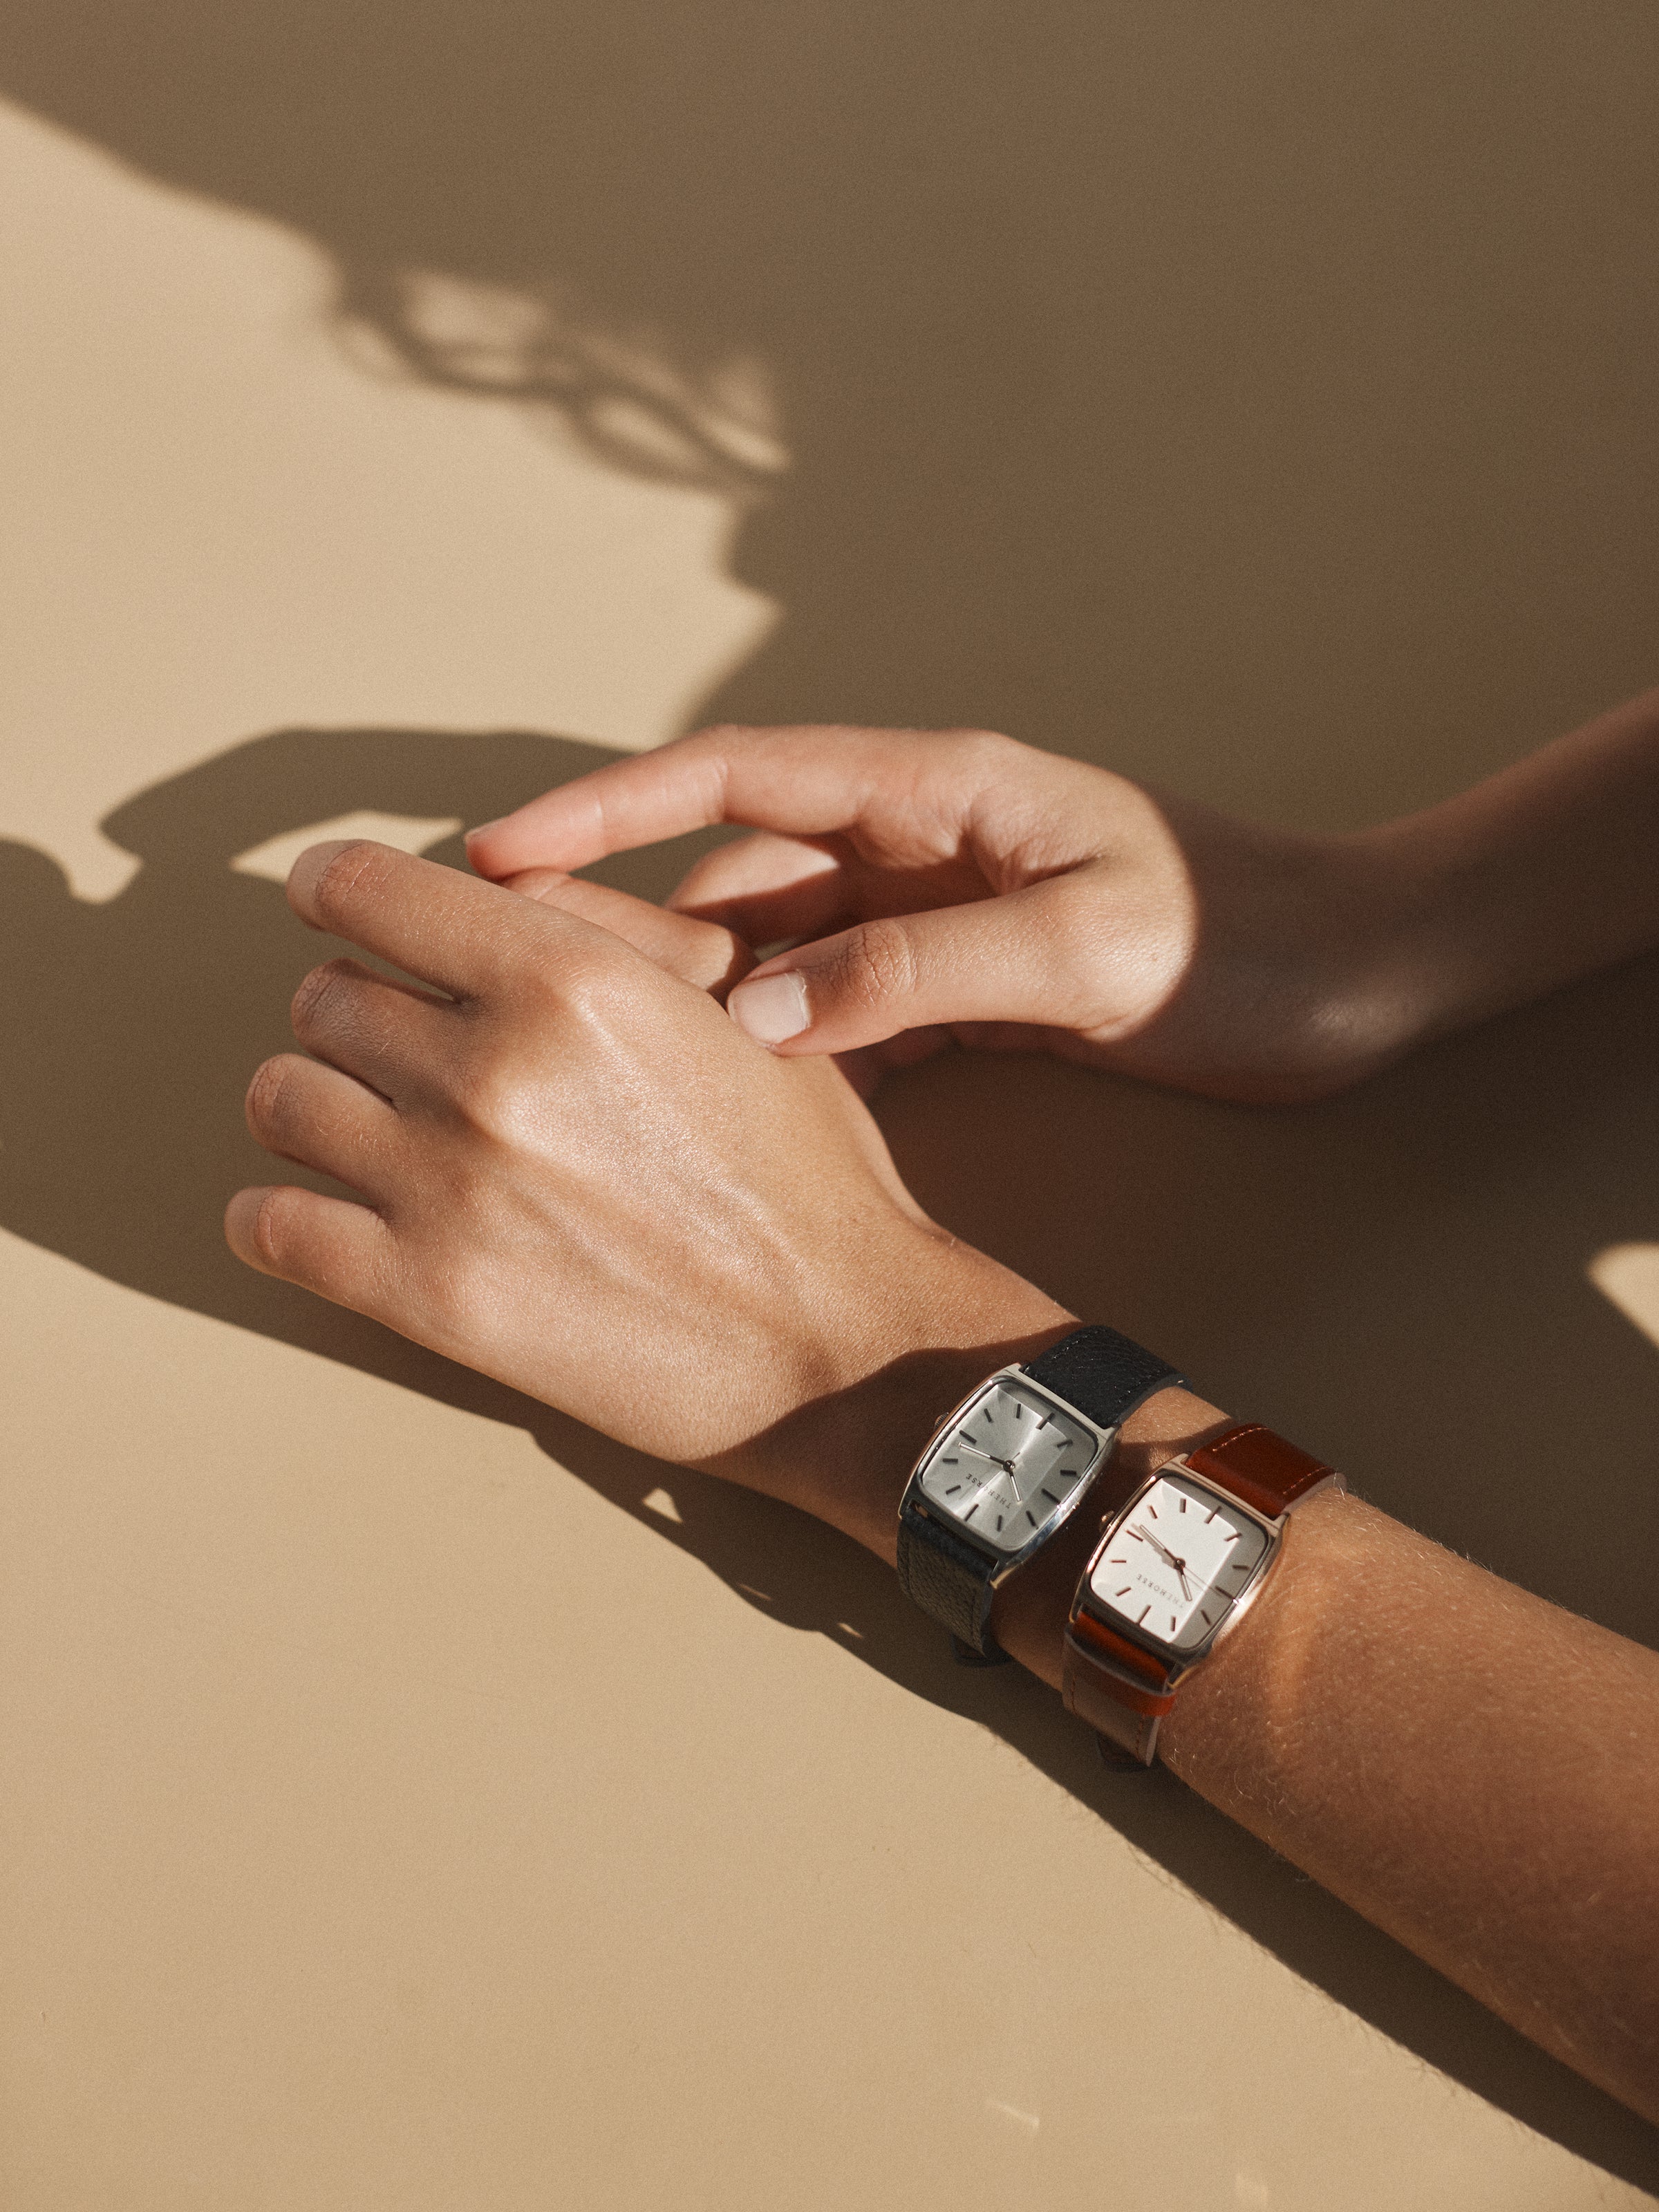 The Dress Watch: Polished Silver / Sunray Dial / Black Leather